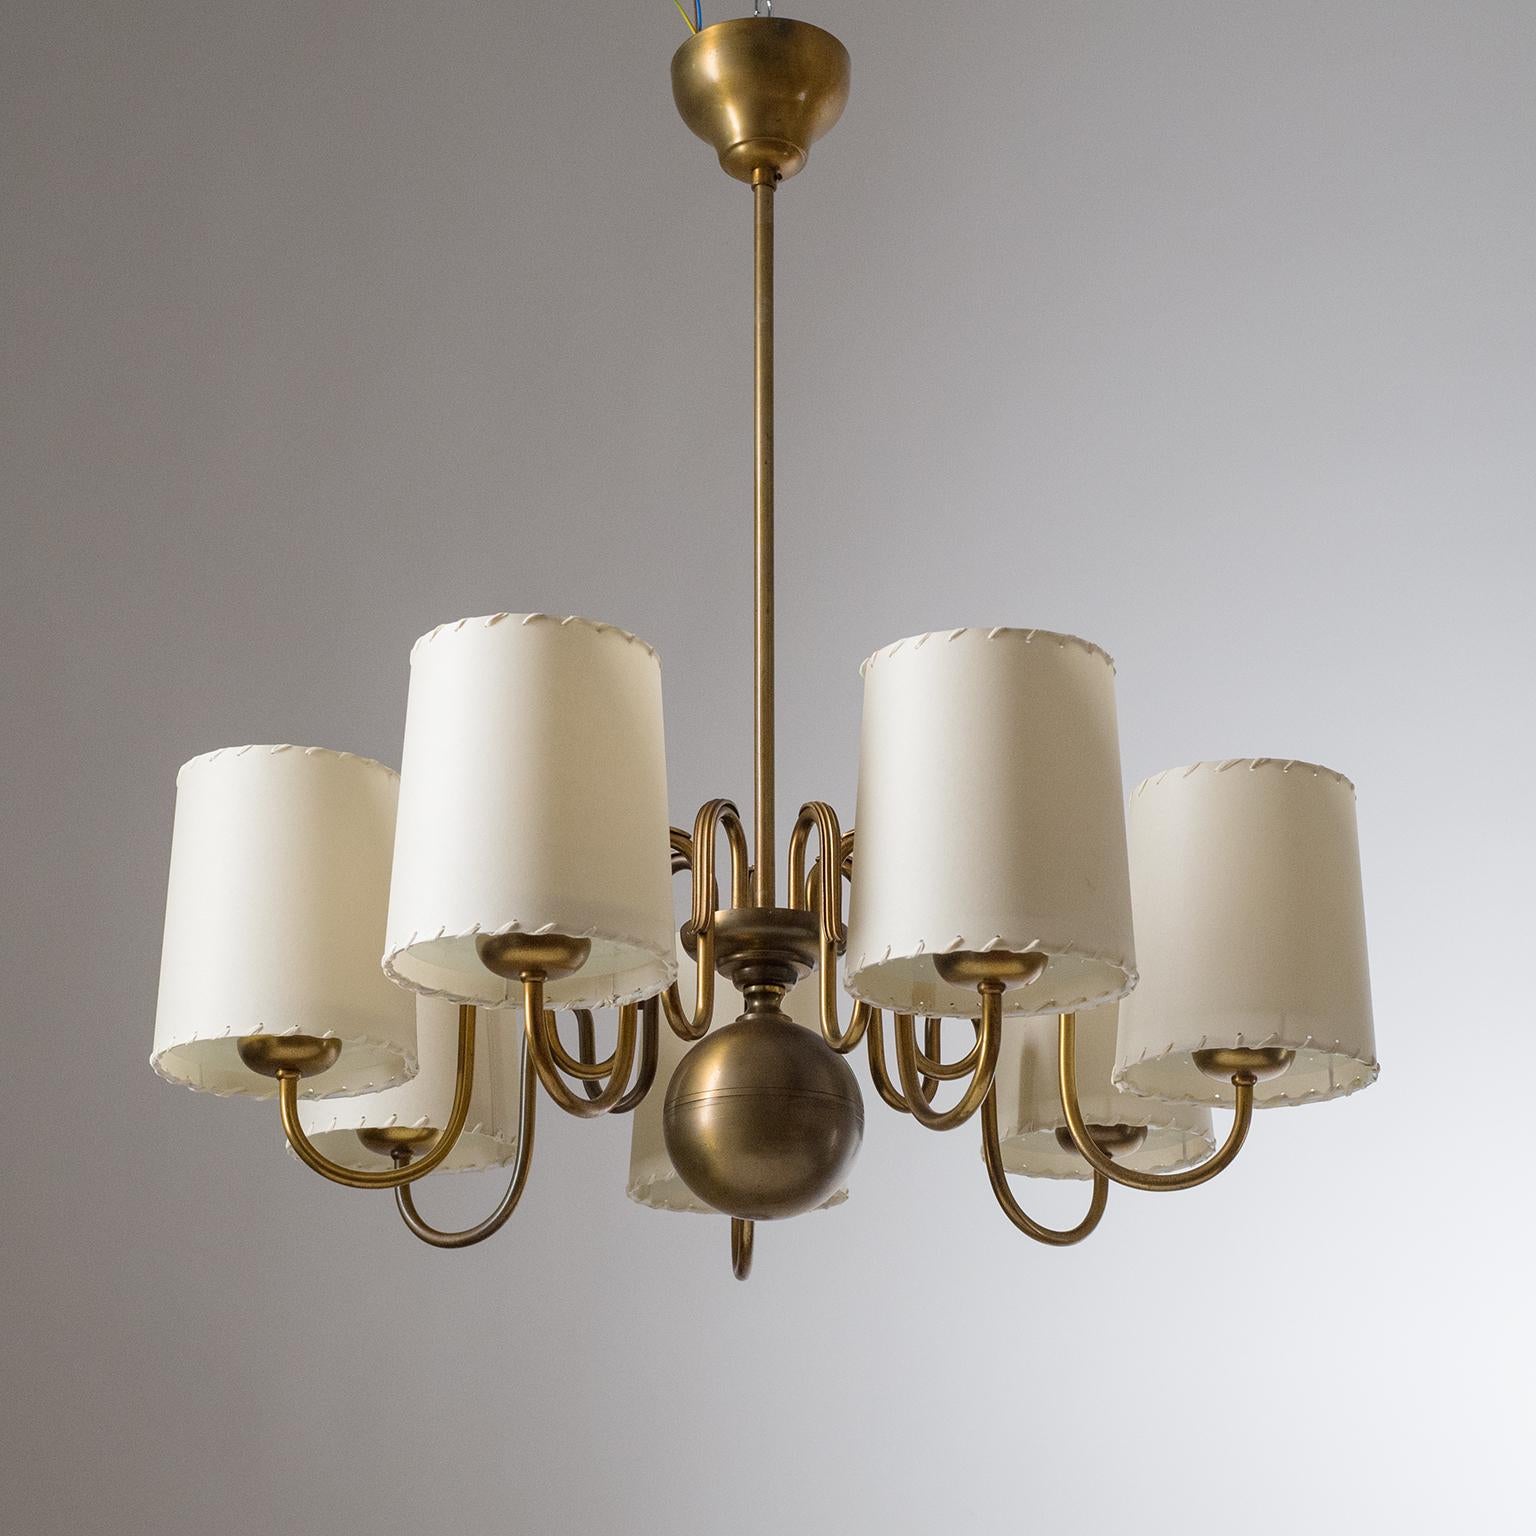 Rare Swedish brass chandelier by ASEA from the 1930, attributed to Hans Bergström. Seven brass arms, shaped in a cascading waterfall, with beometric decorations. Each arm ends in a frosted glass disc upon which the new parchment shades are placed.